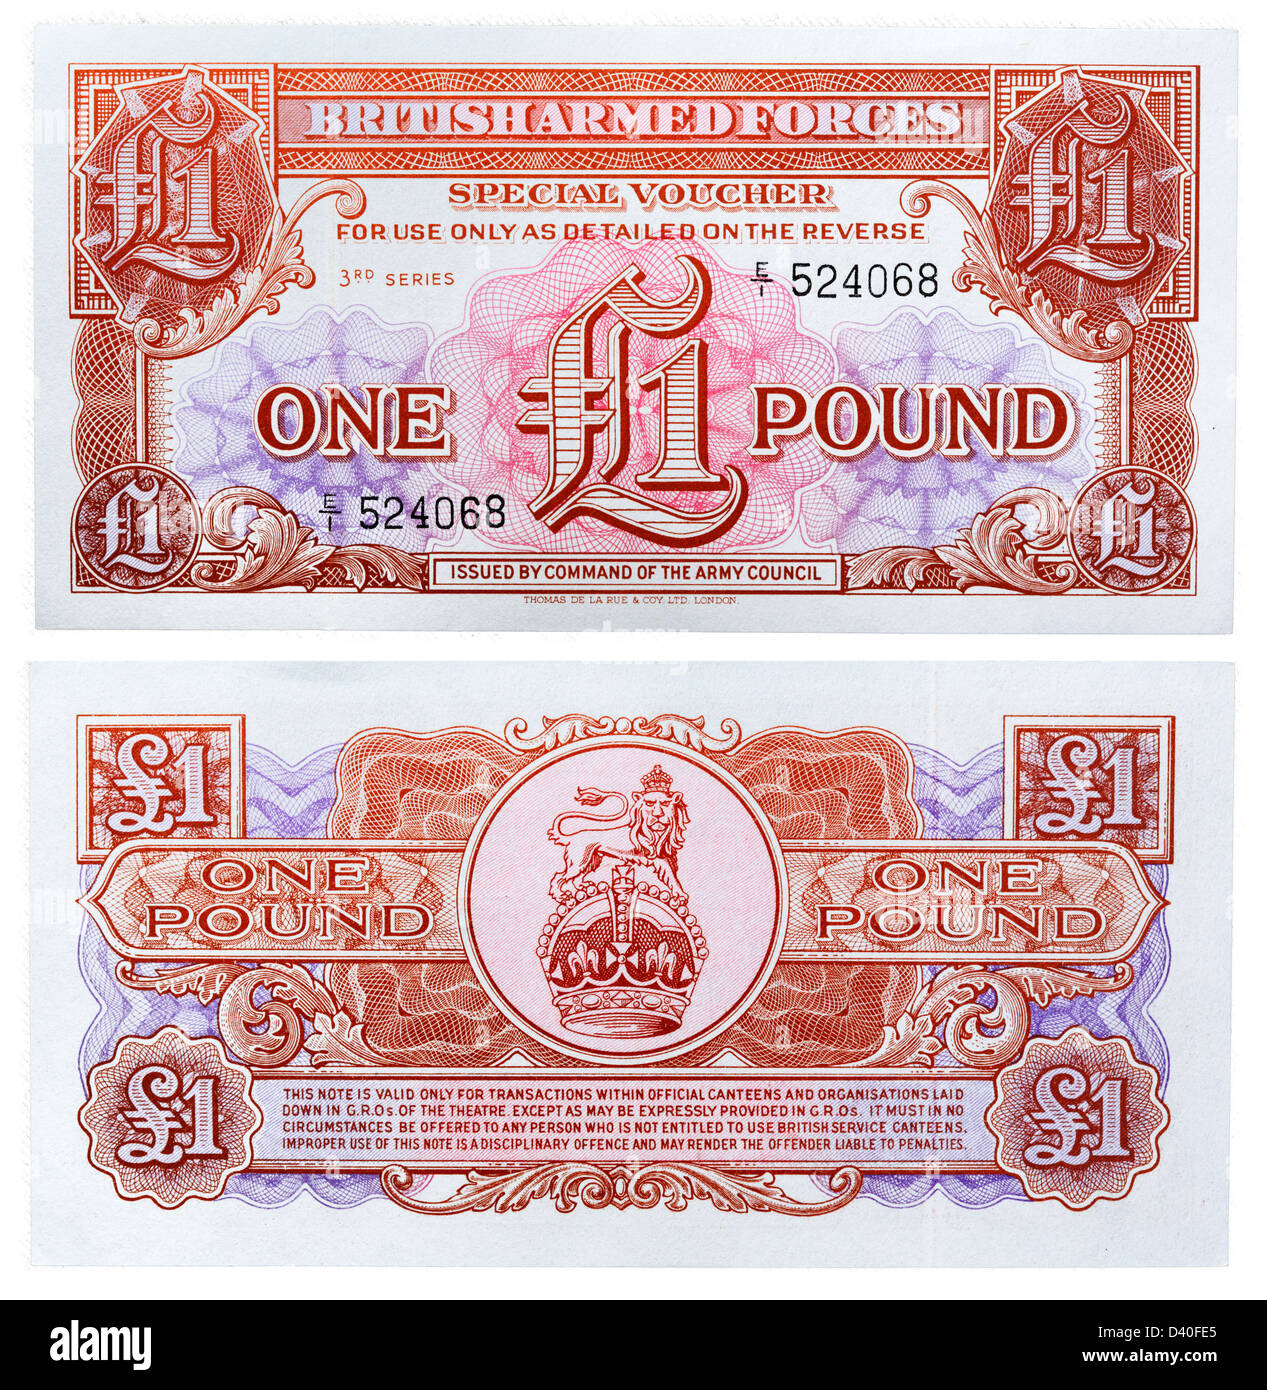 1 Pound banknote, UK, British Armed Forces, 1956 Stock Photo